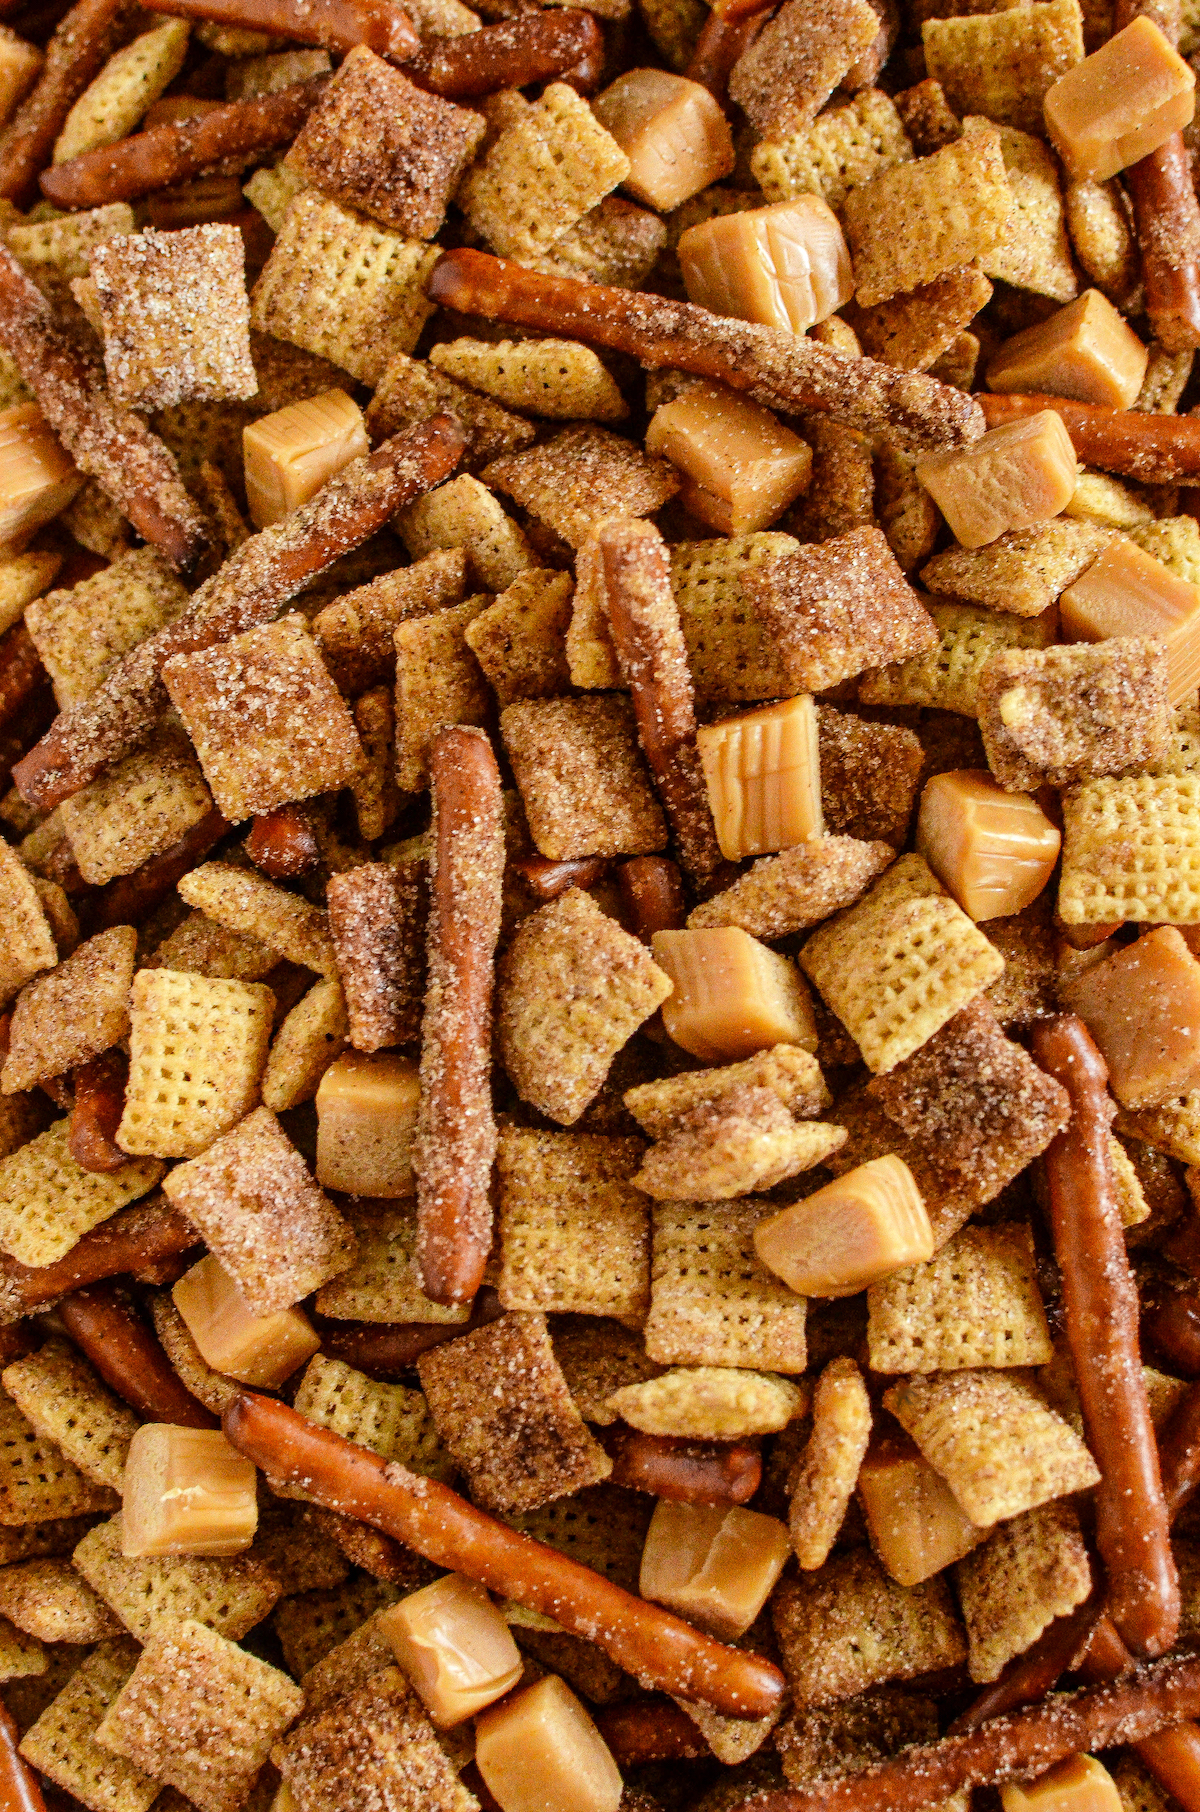 Cinnamon sugar Chex mix with pretzels and caramel squares.